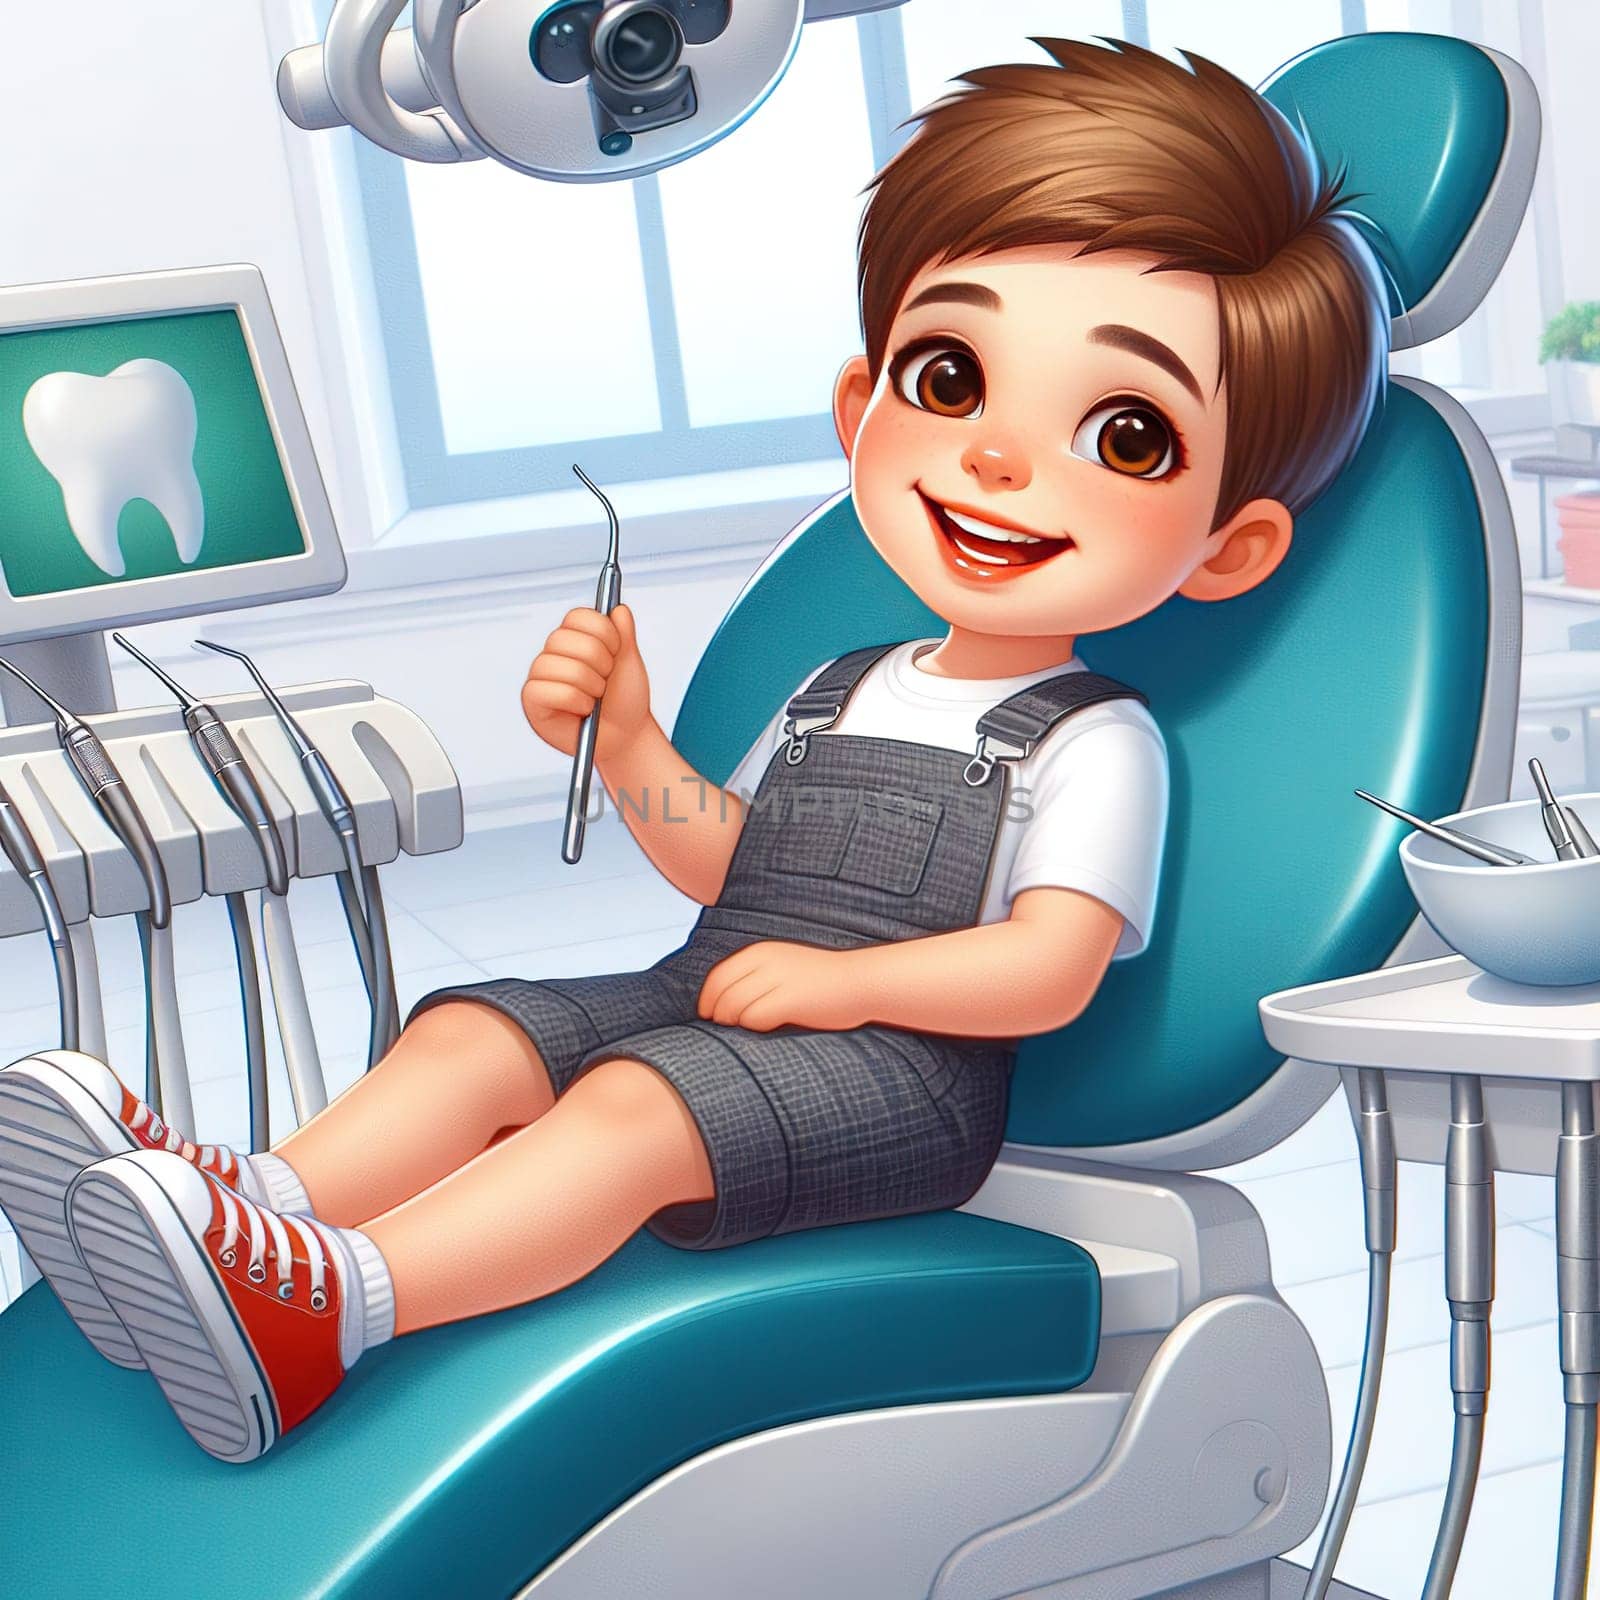 A small boy in a chair at a dentist's appointment. generative, AI by gordiza